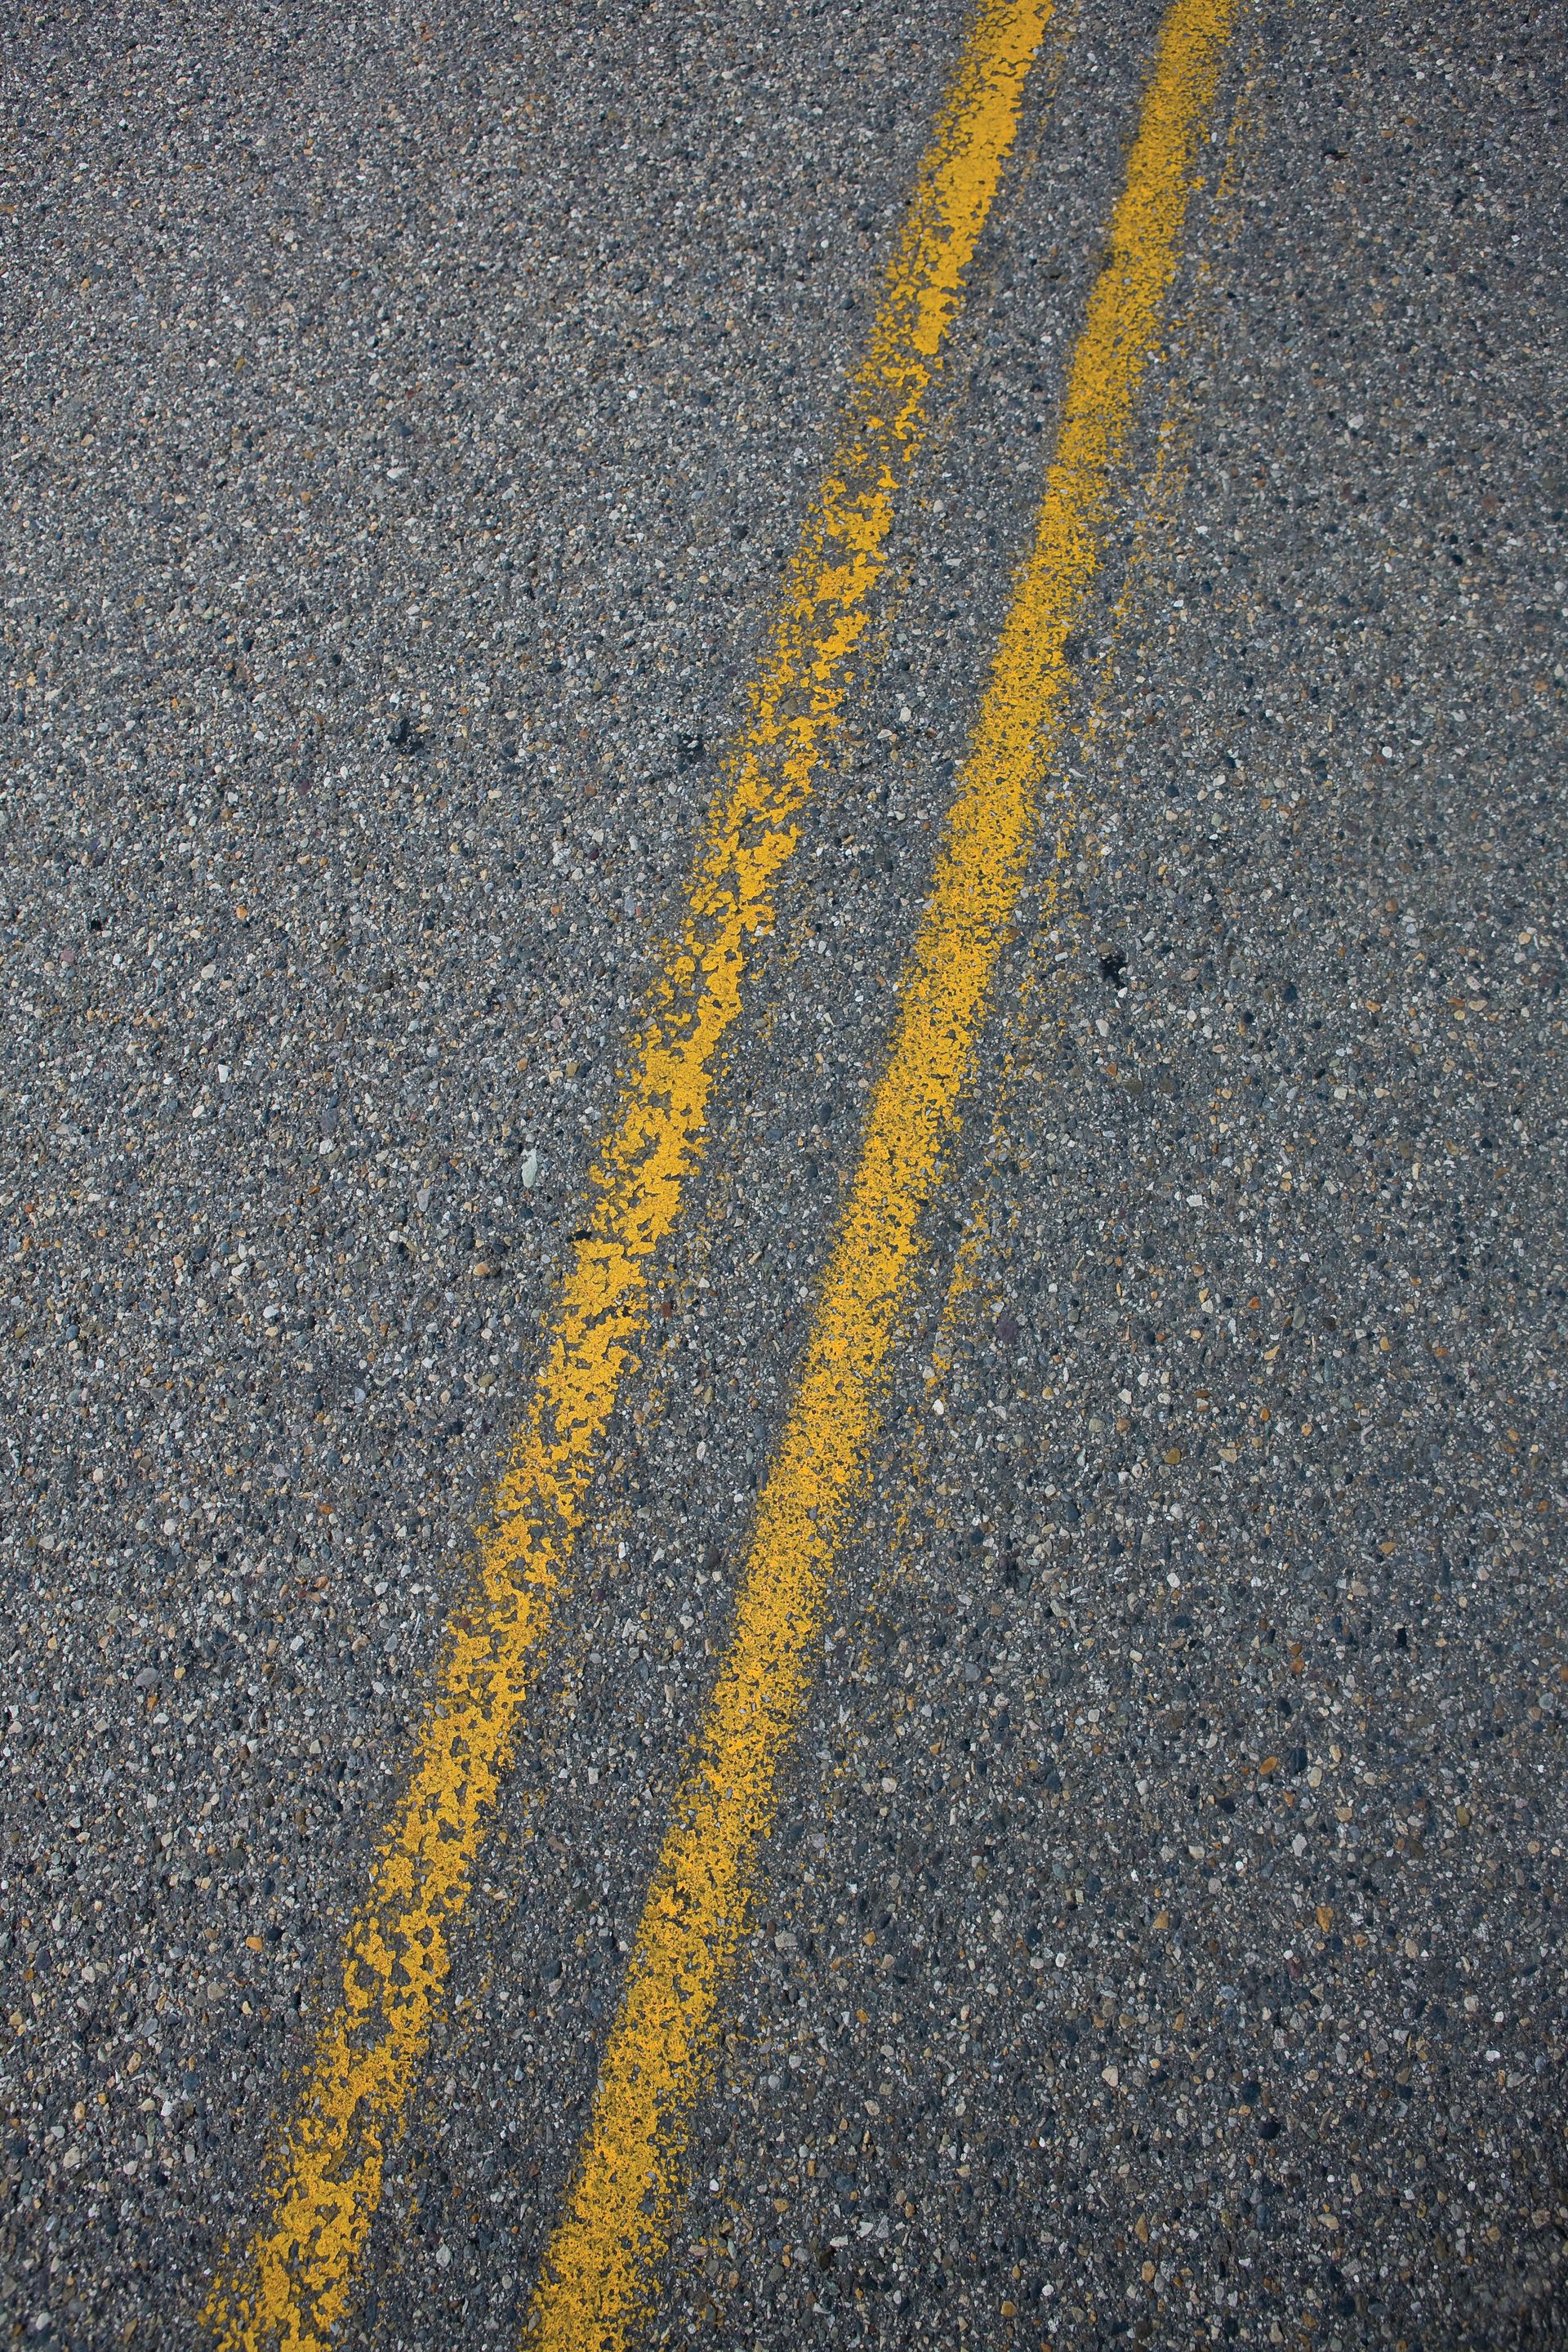 A painted double yellow line on an asphalt road.